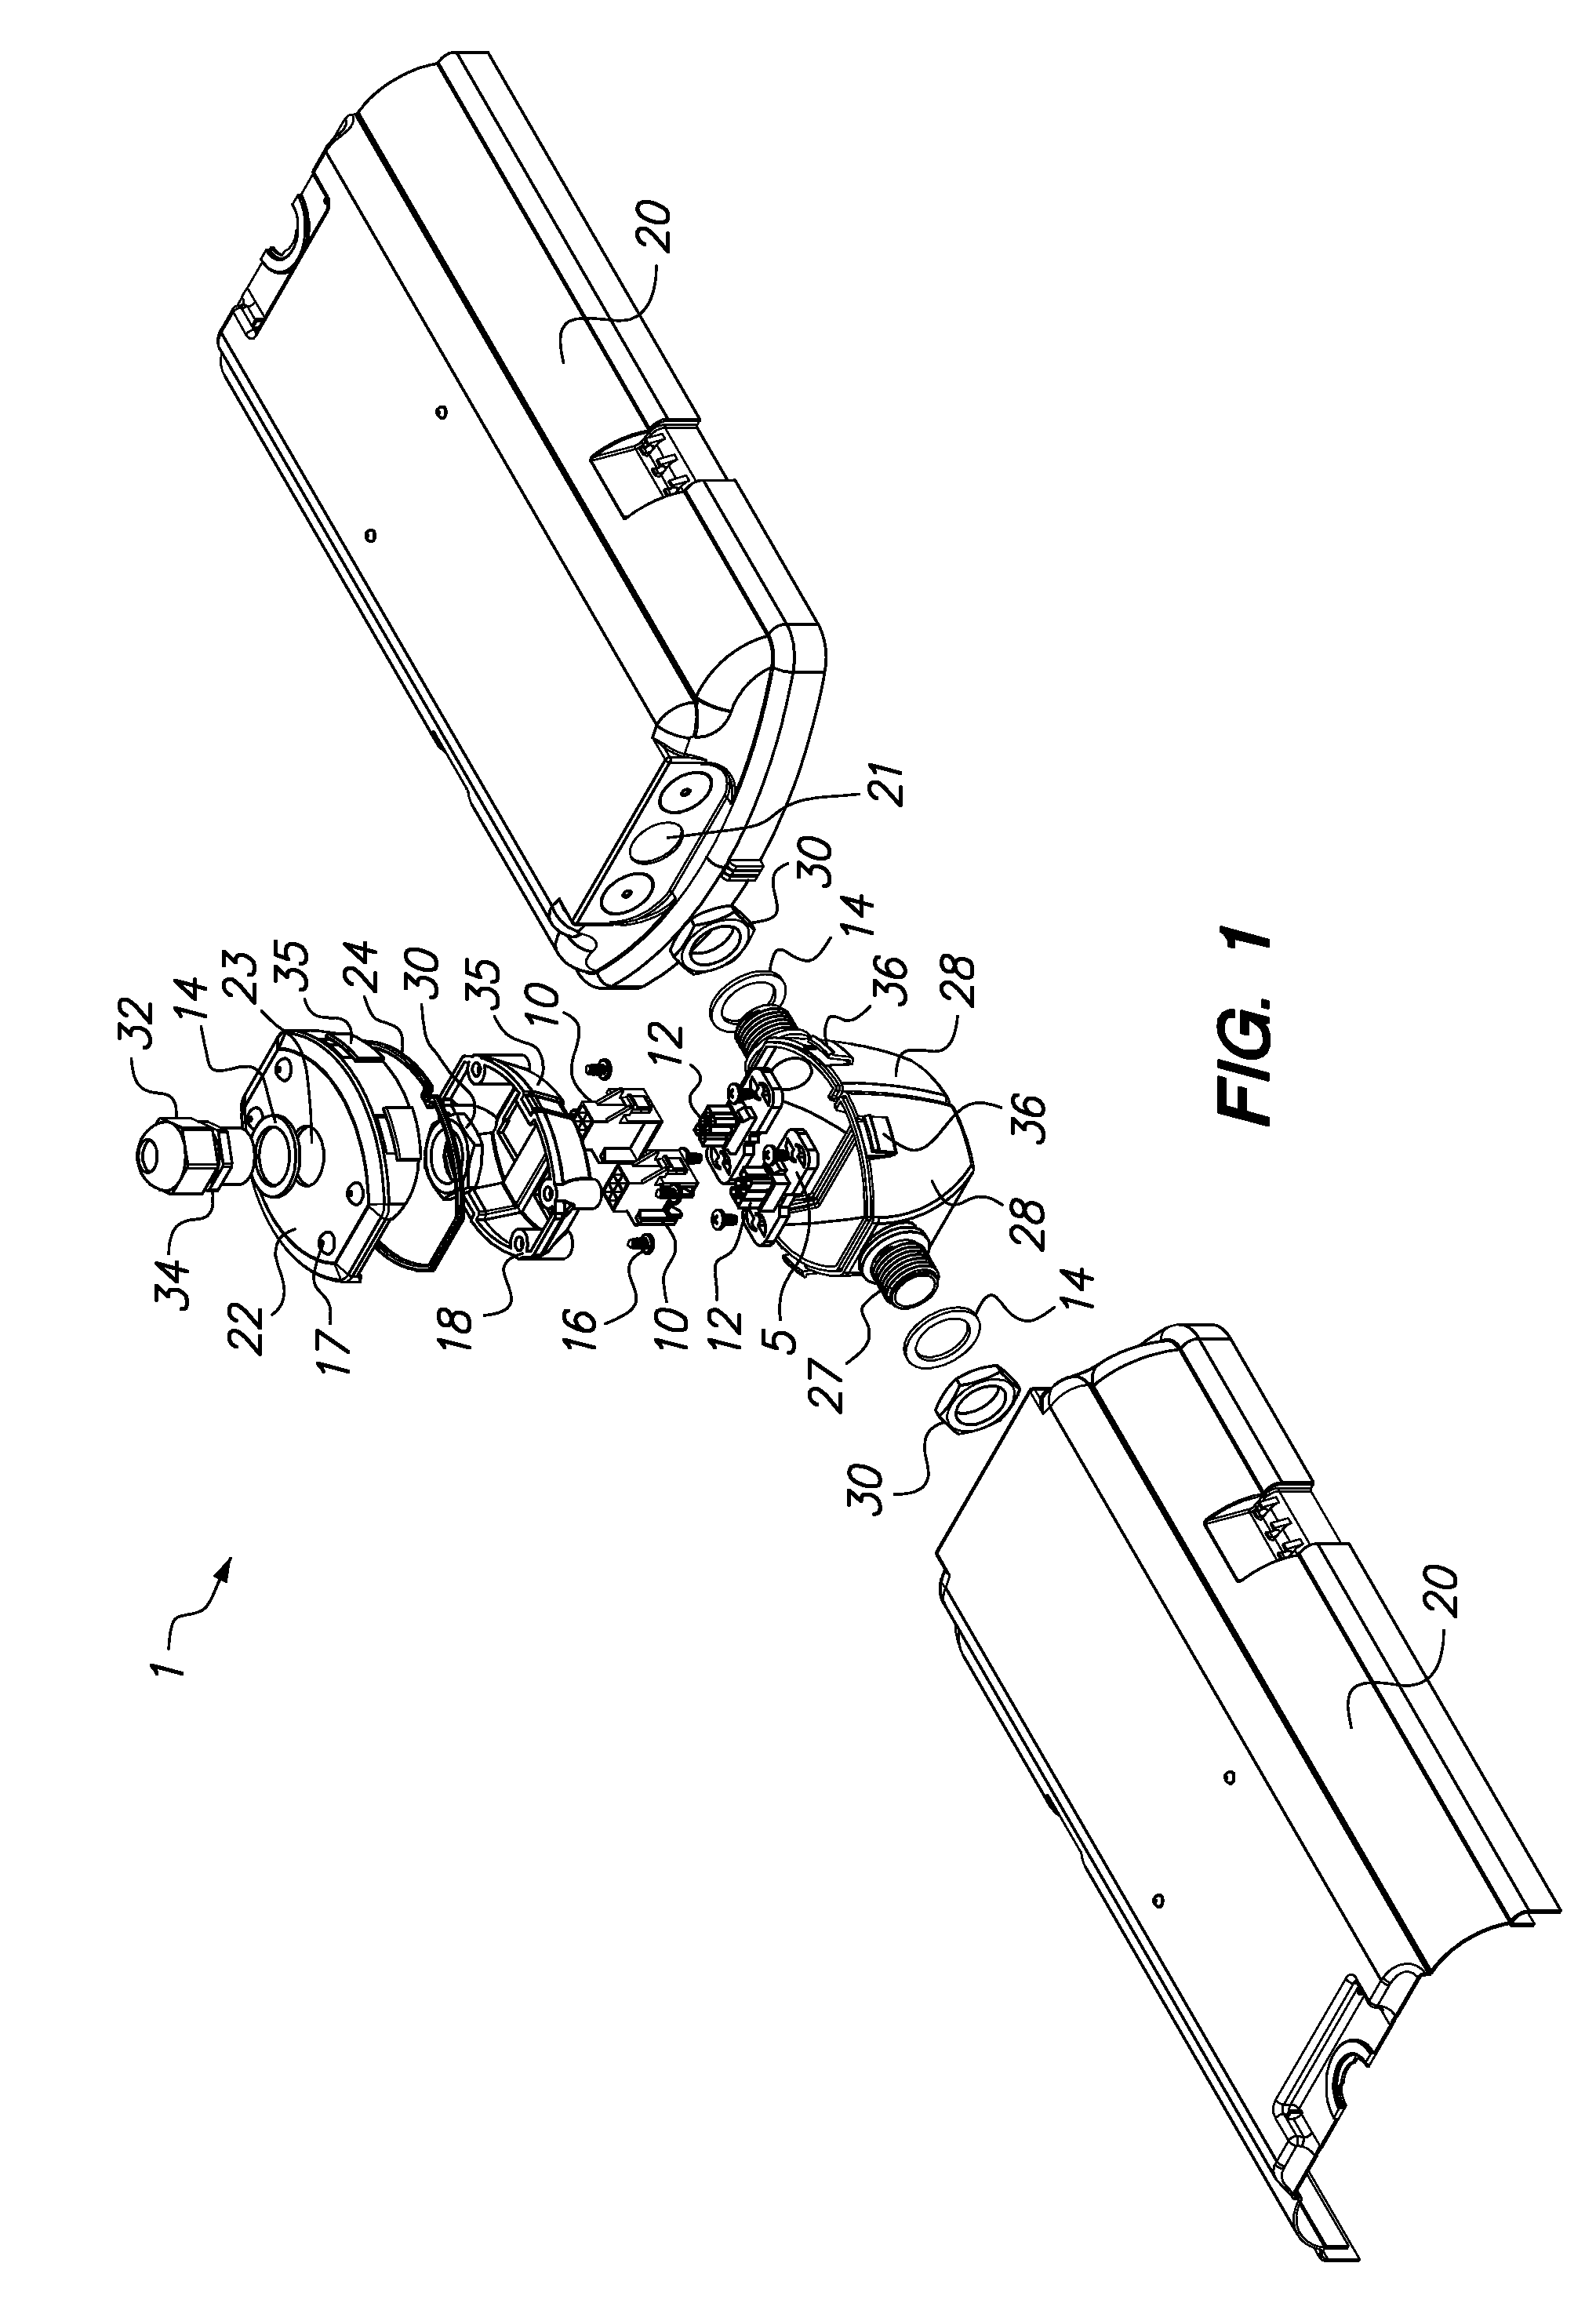 Apparatus, system and method for connecting linear light fixtures